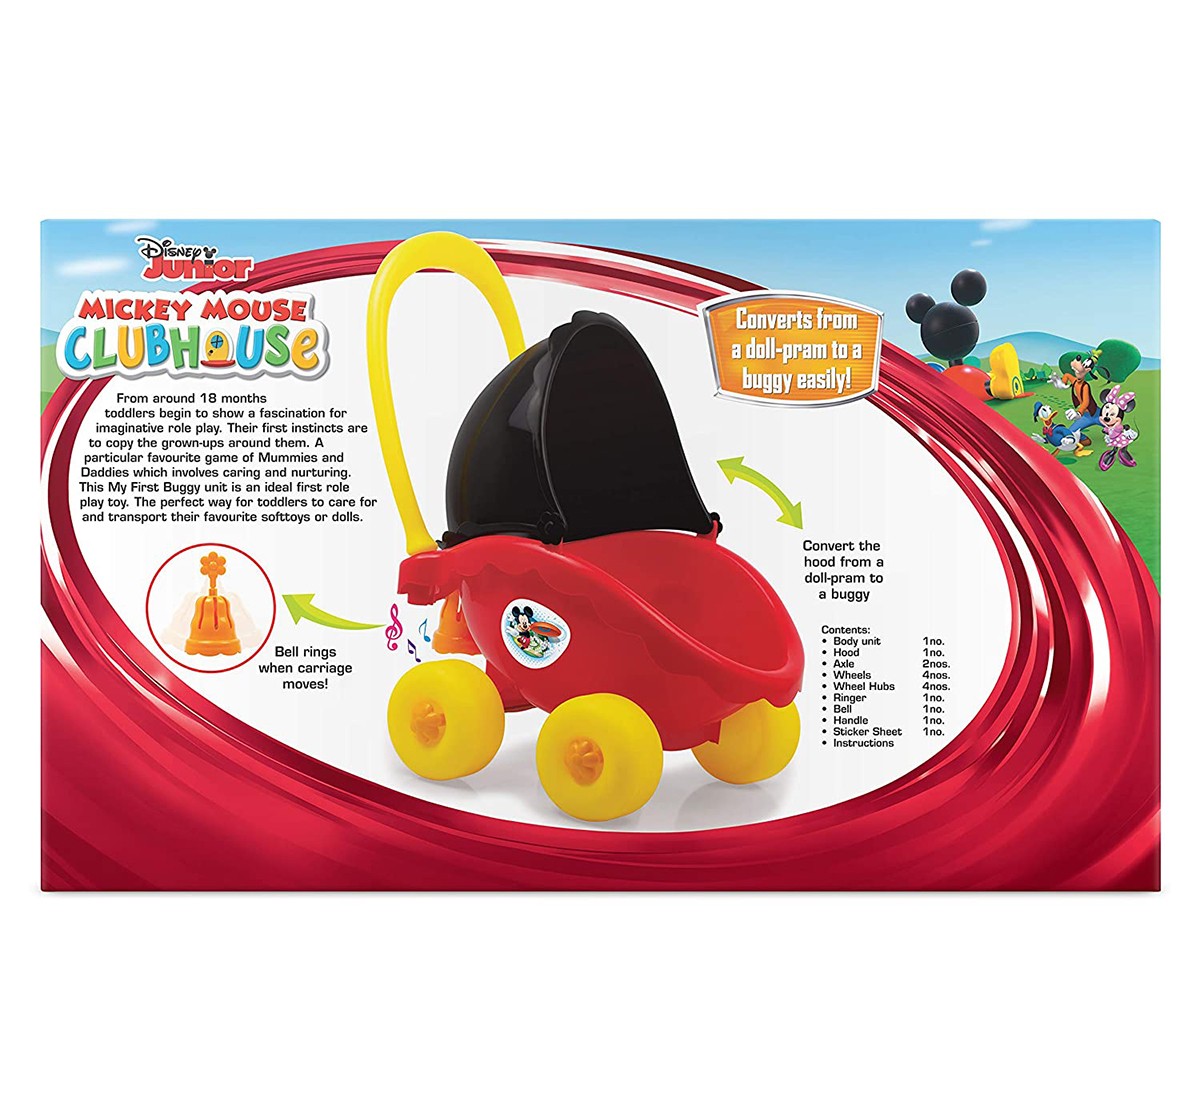 Giggles Mickey My First Buggy Activity Toys for Kids age 18M + (Red)